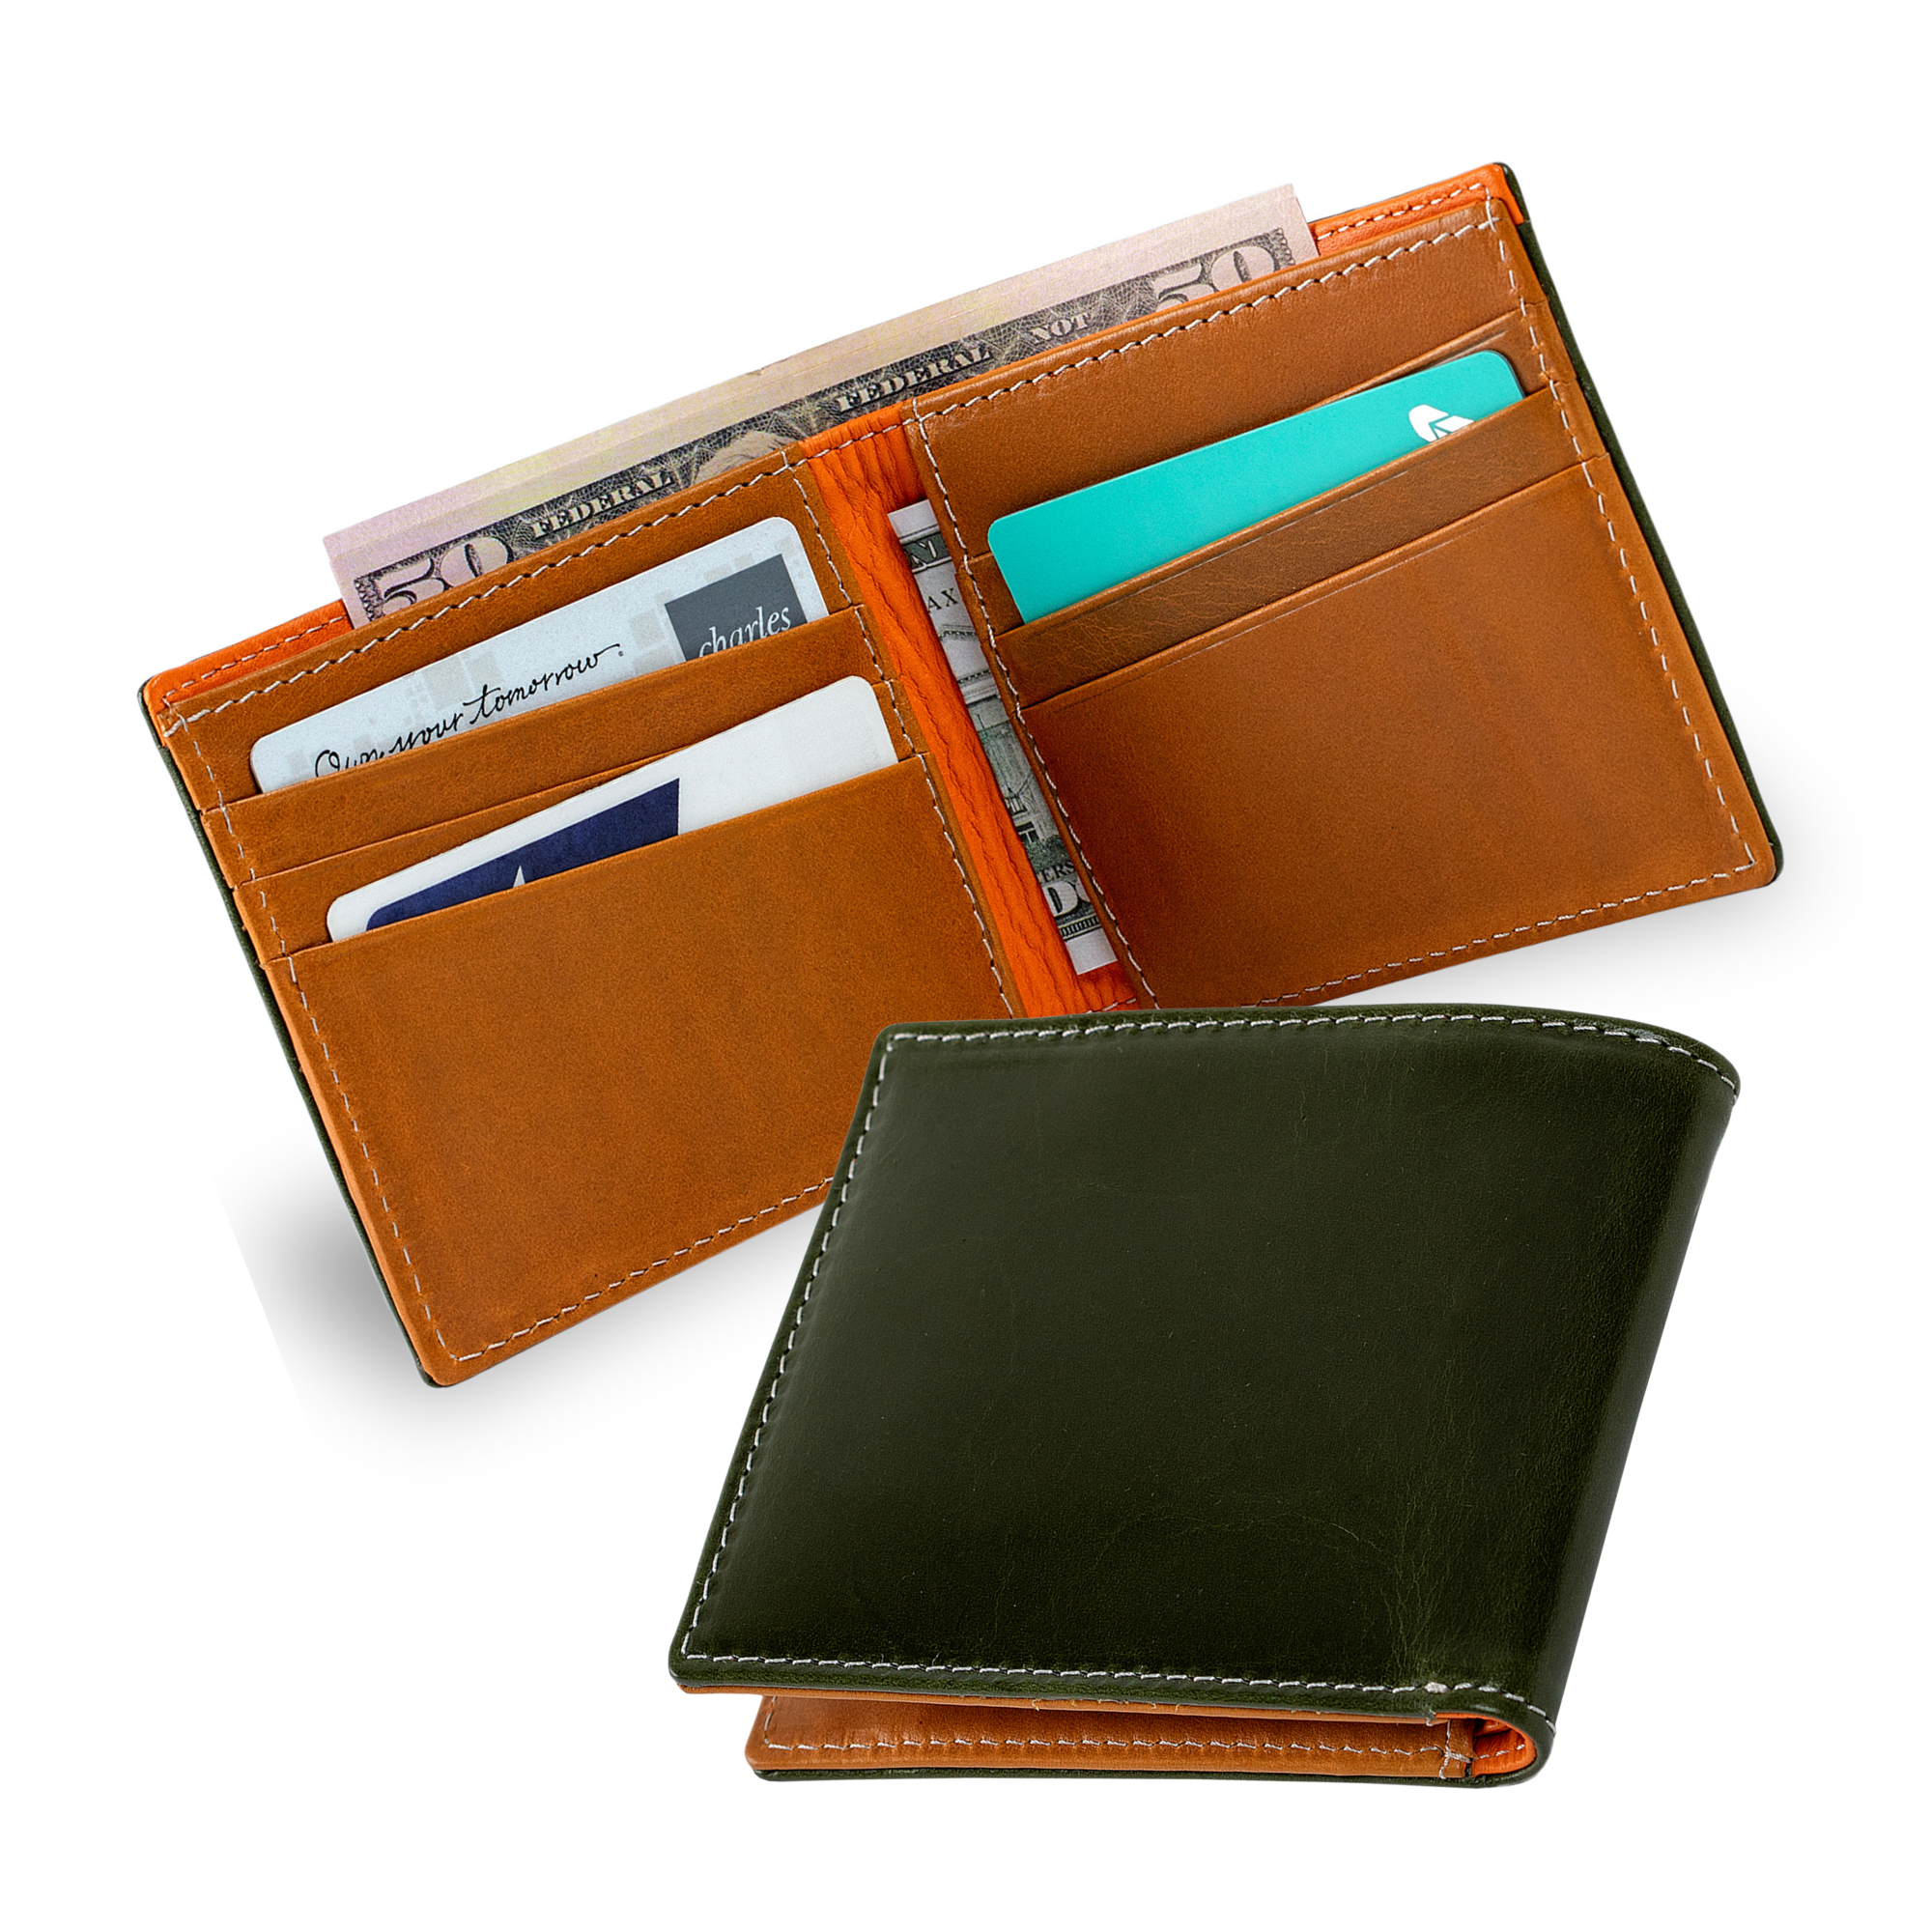 Genuine leather wallet srilanka | anniversary gifts and gift box